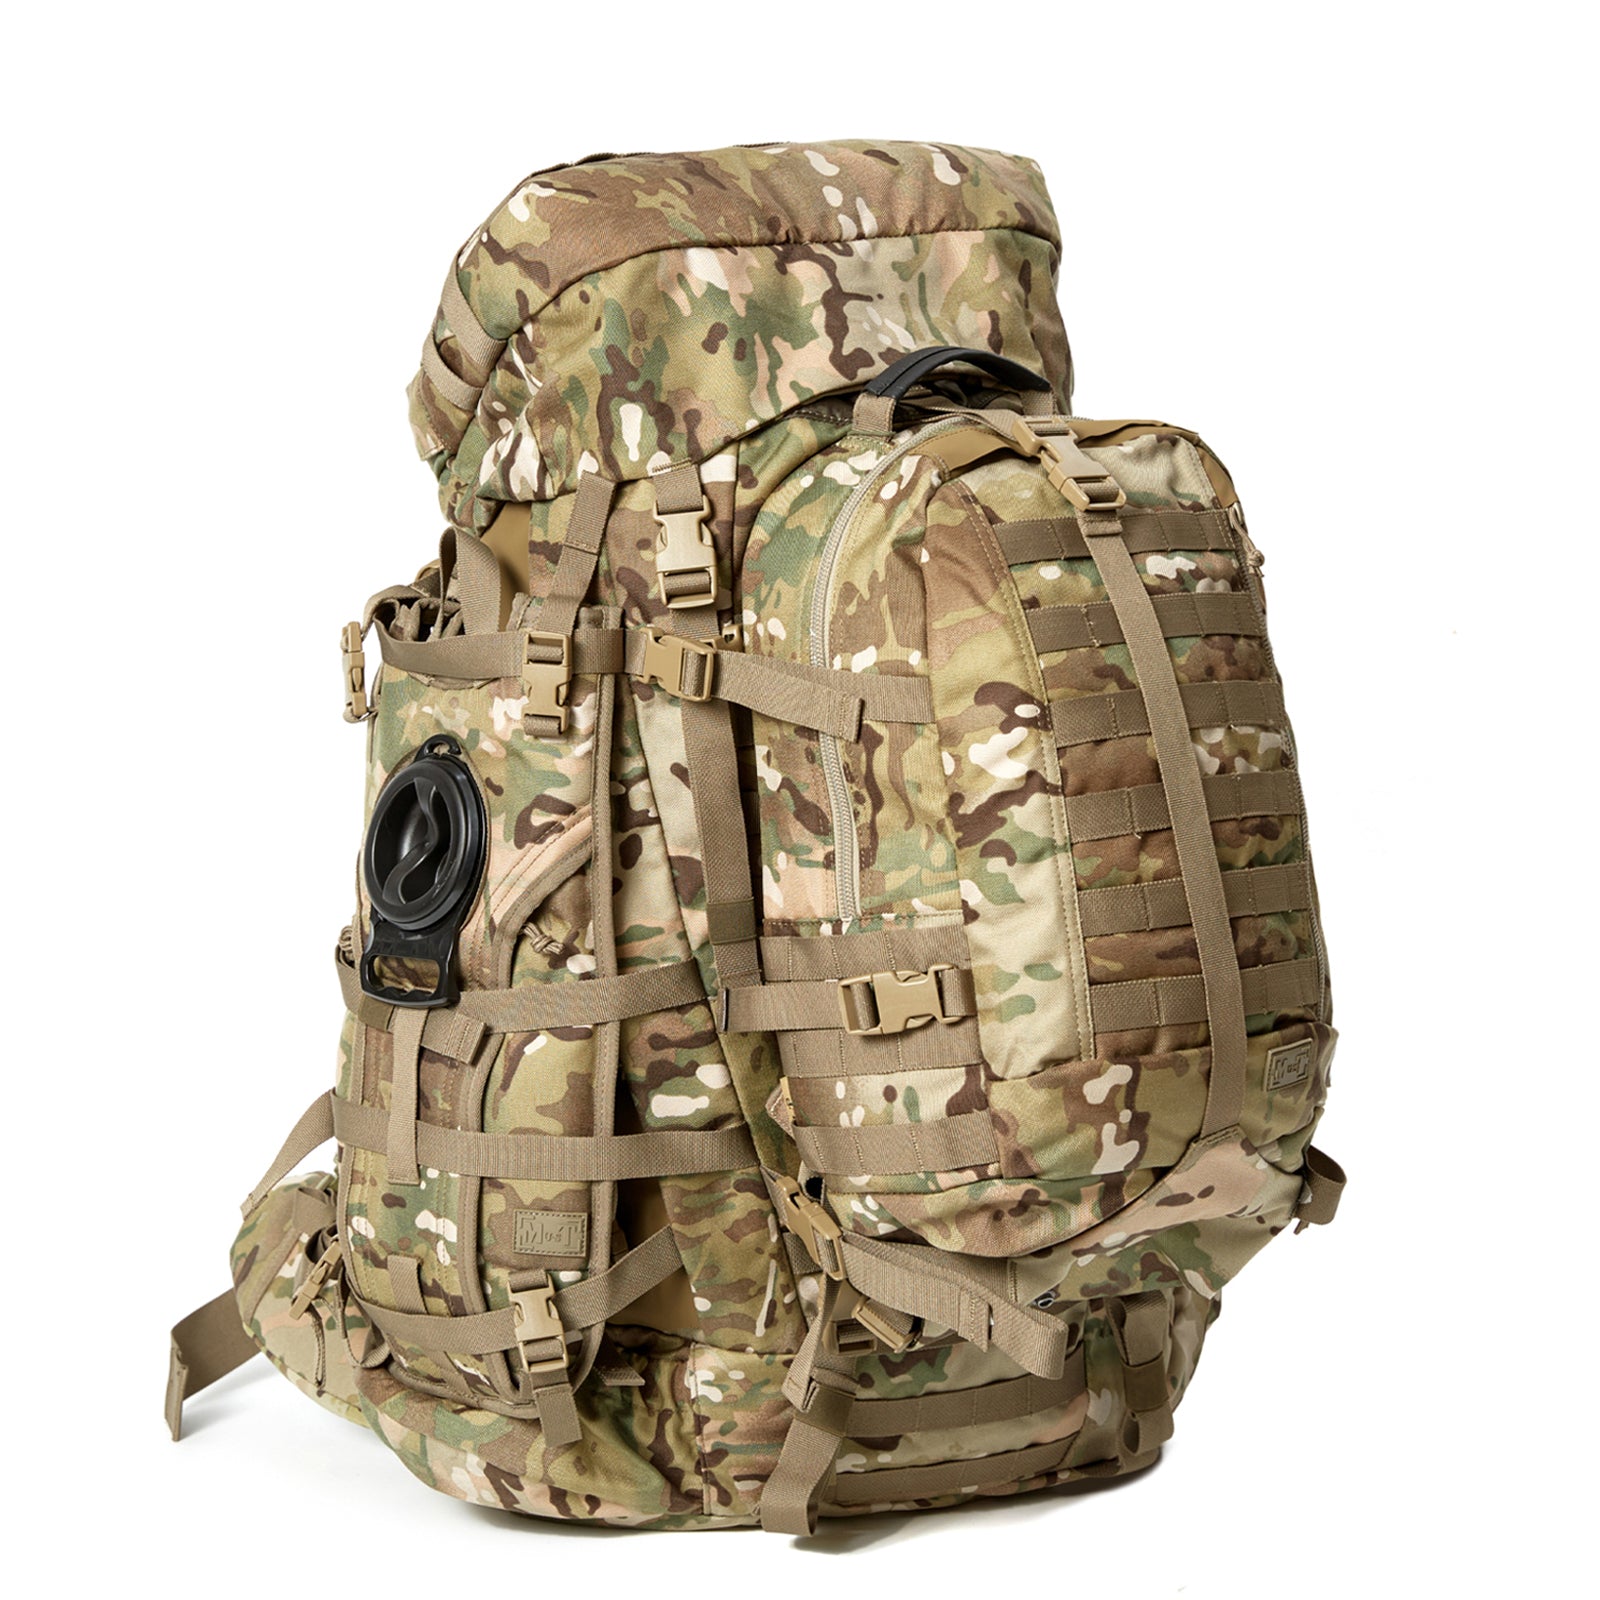 AKmax Large Rucksack with Detacheable Tactical Backpack Hydration Pack Shoulder Straps and Waist Belt Multicam - AKmax